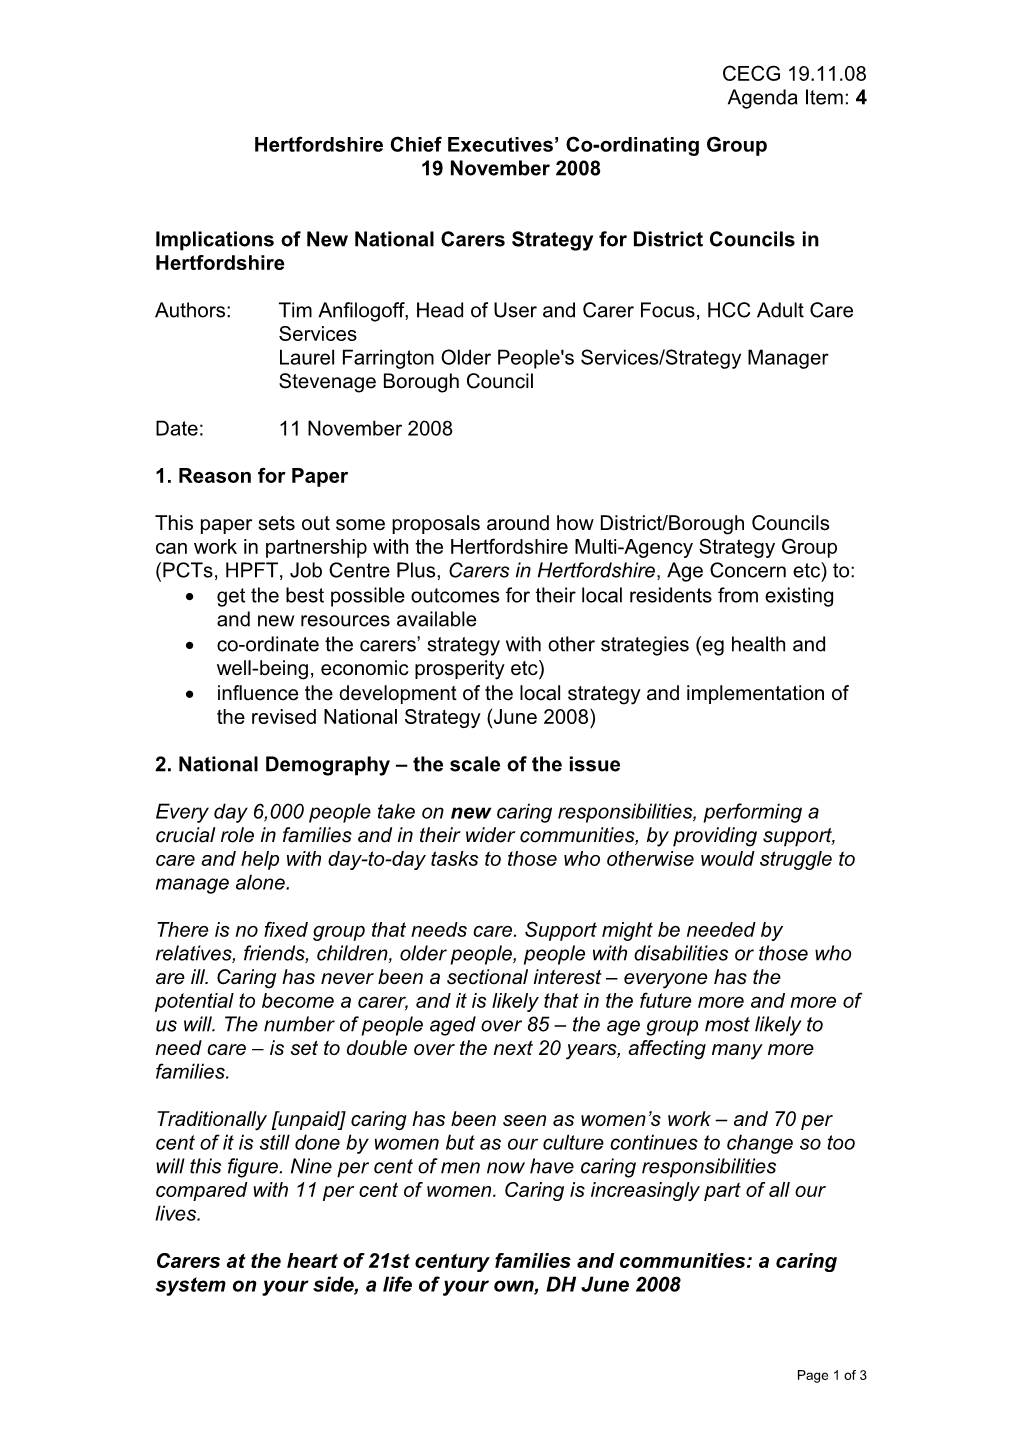 Report: Local Strategic Partnership Board 23.02.09: Part I - (8Cii) Imps for New National